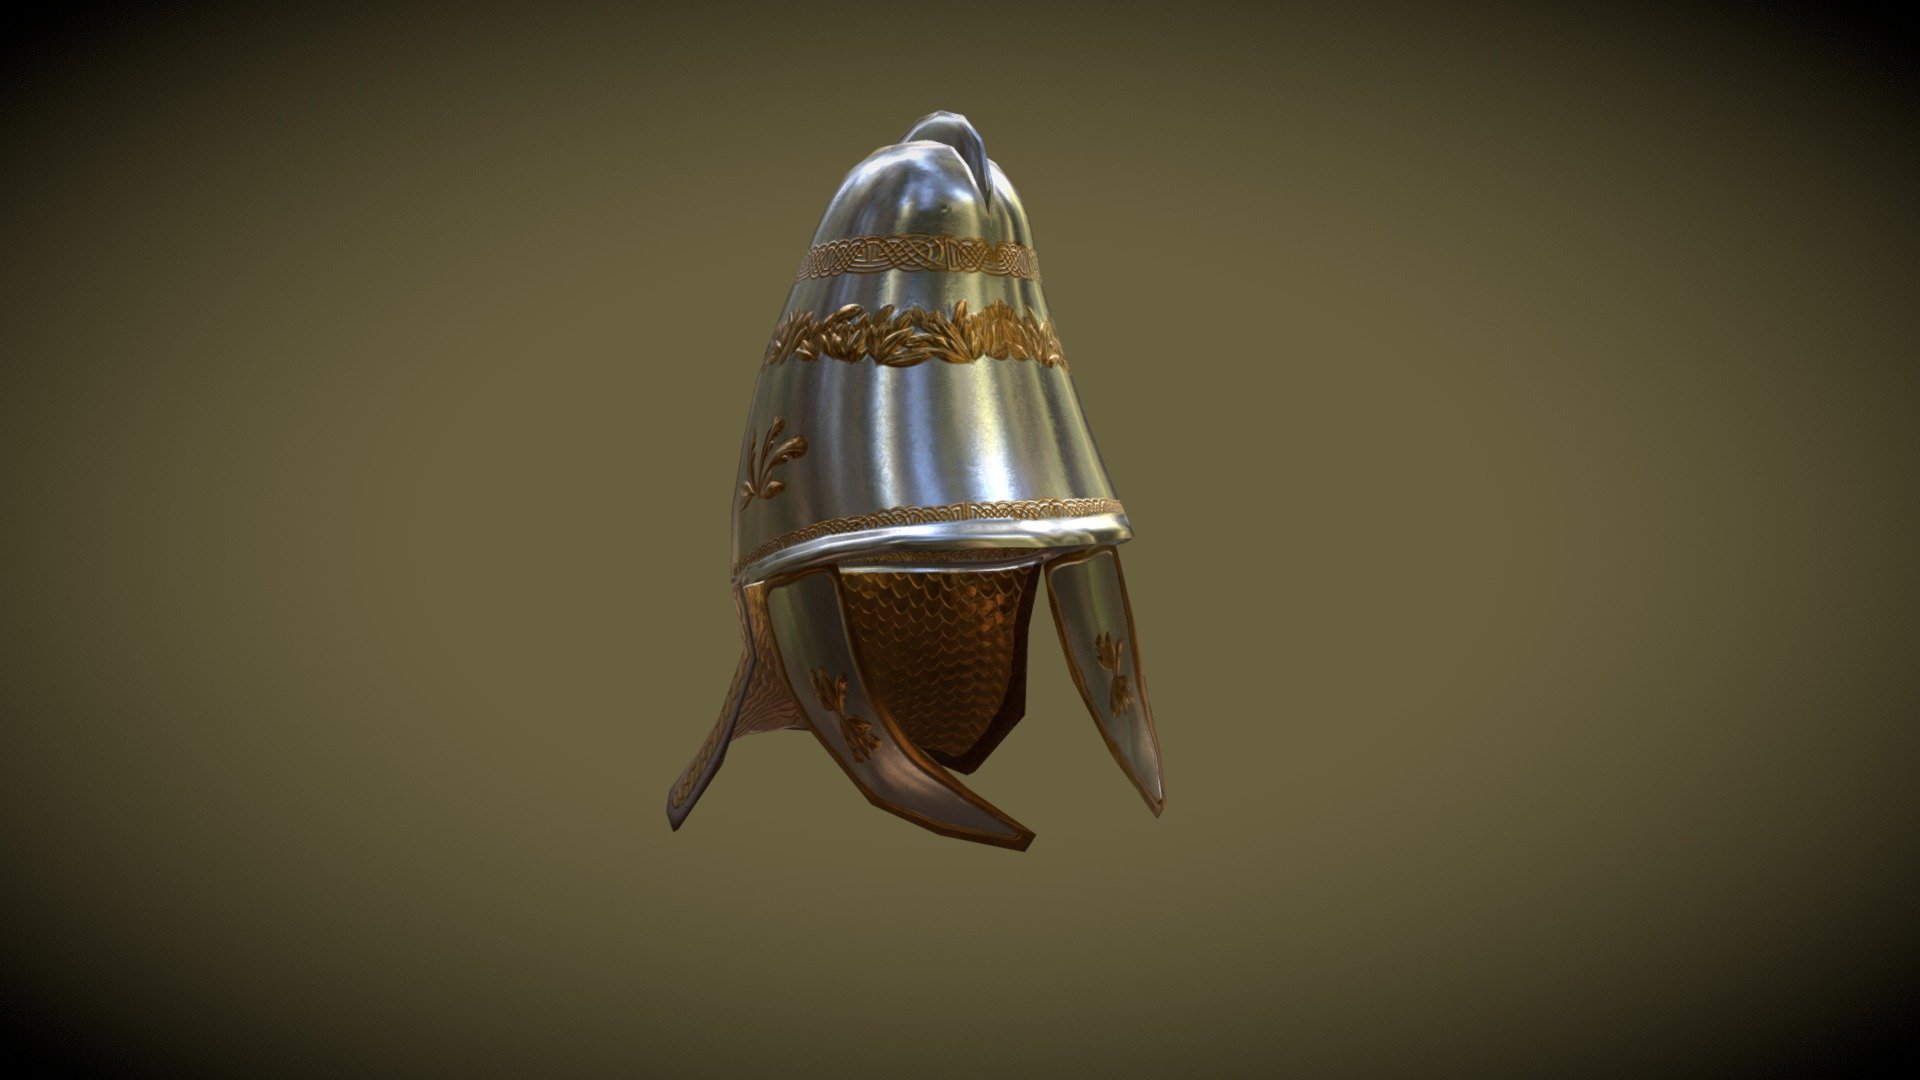 A Dacian Helmet made for the RIR: Imperium Surrectum mod, for the game Rome Total War Remastered.

Made in Blender. Verts: 386, Faces: 362

The process consists of modelling a low poly version, from which a copy is made with a very high dense mesh where details are sculpted in, later baked onto its low poly counterpart.

This is arguably one of the first big challenges that I came across in my contributions to the mod, for one simple reason: as a beginner I still did not know how to have more than 1 texture in one single model. The upside is that I greatly enjoy the process of finding out the answers to a problem and the satisfaction one derives from finally being able to achieve what you want 3d model